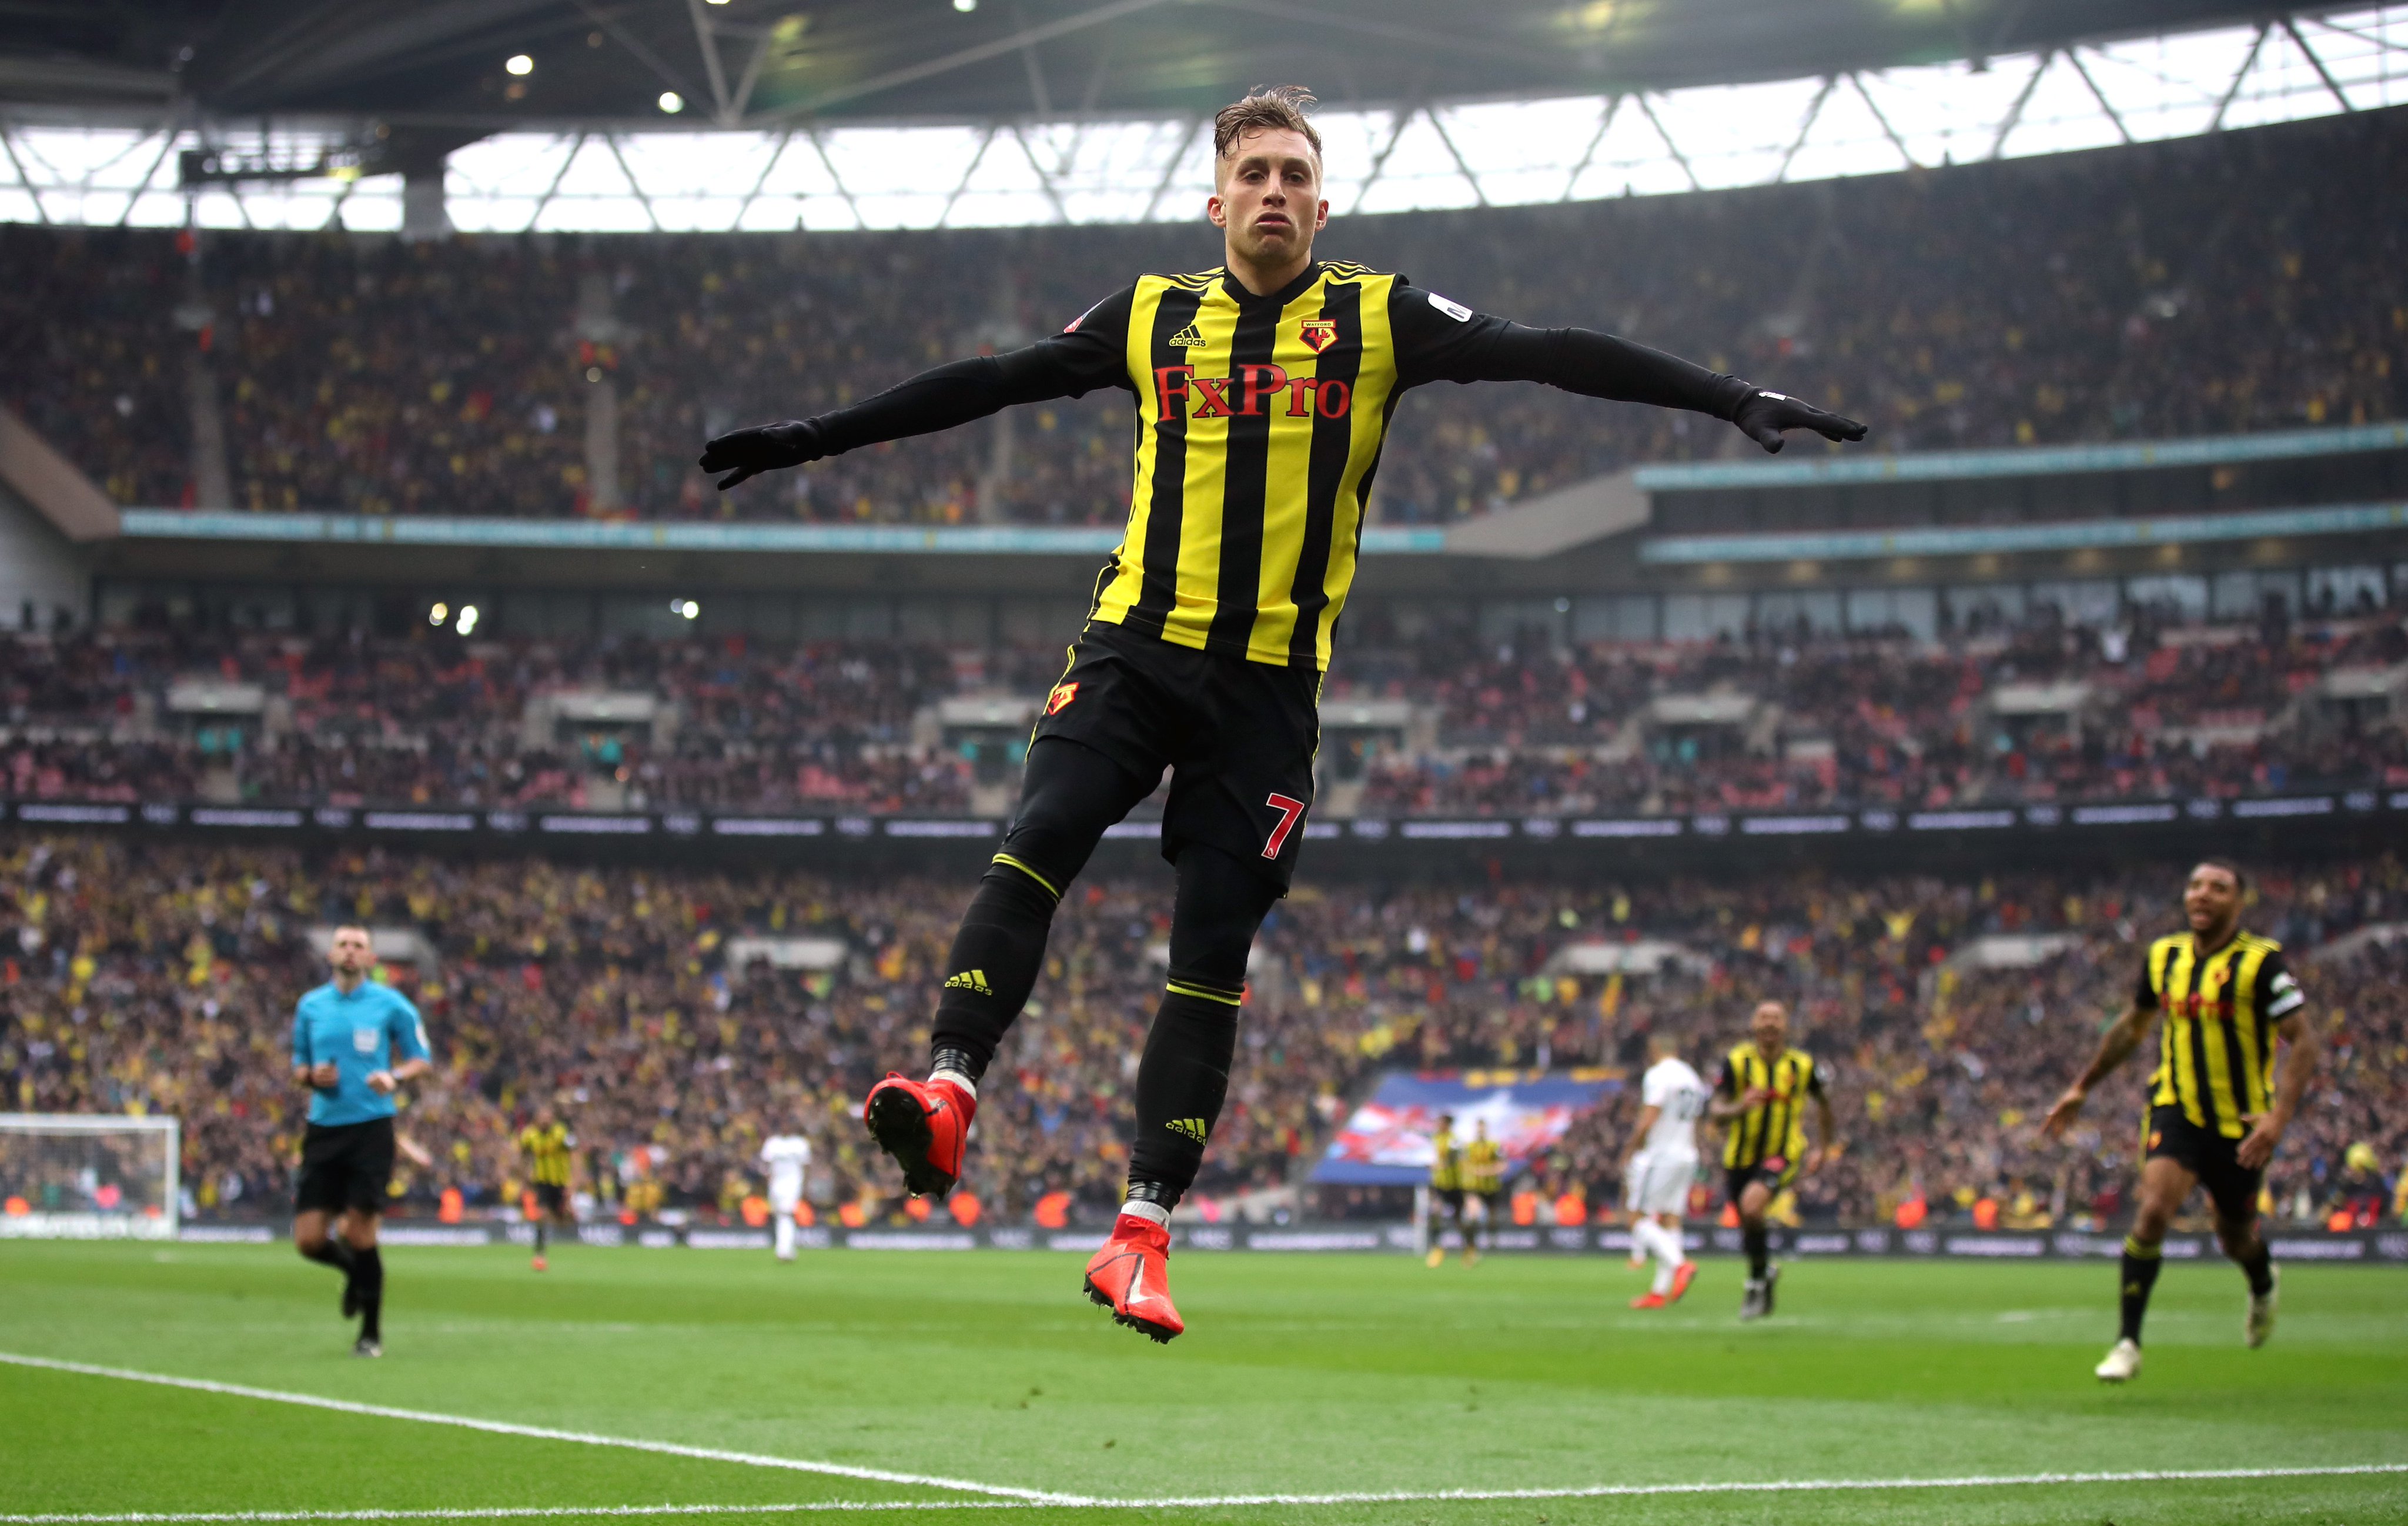 Watford's Deulofeu celebrate after scoring against Wolves (Photo Credit: Squawka News on Twitter)